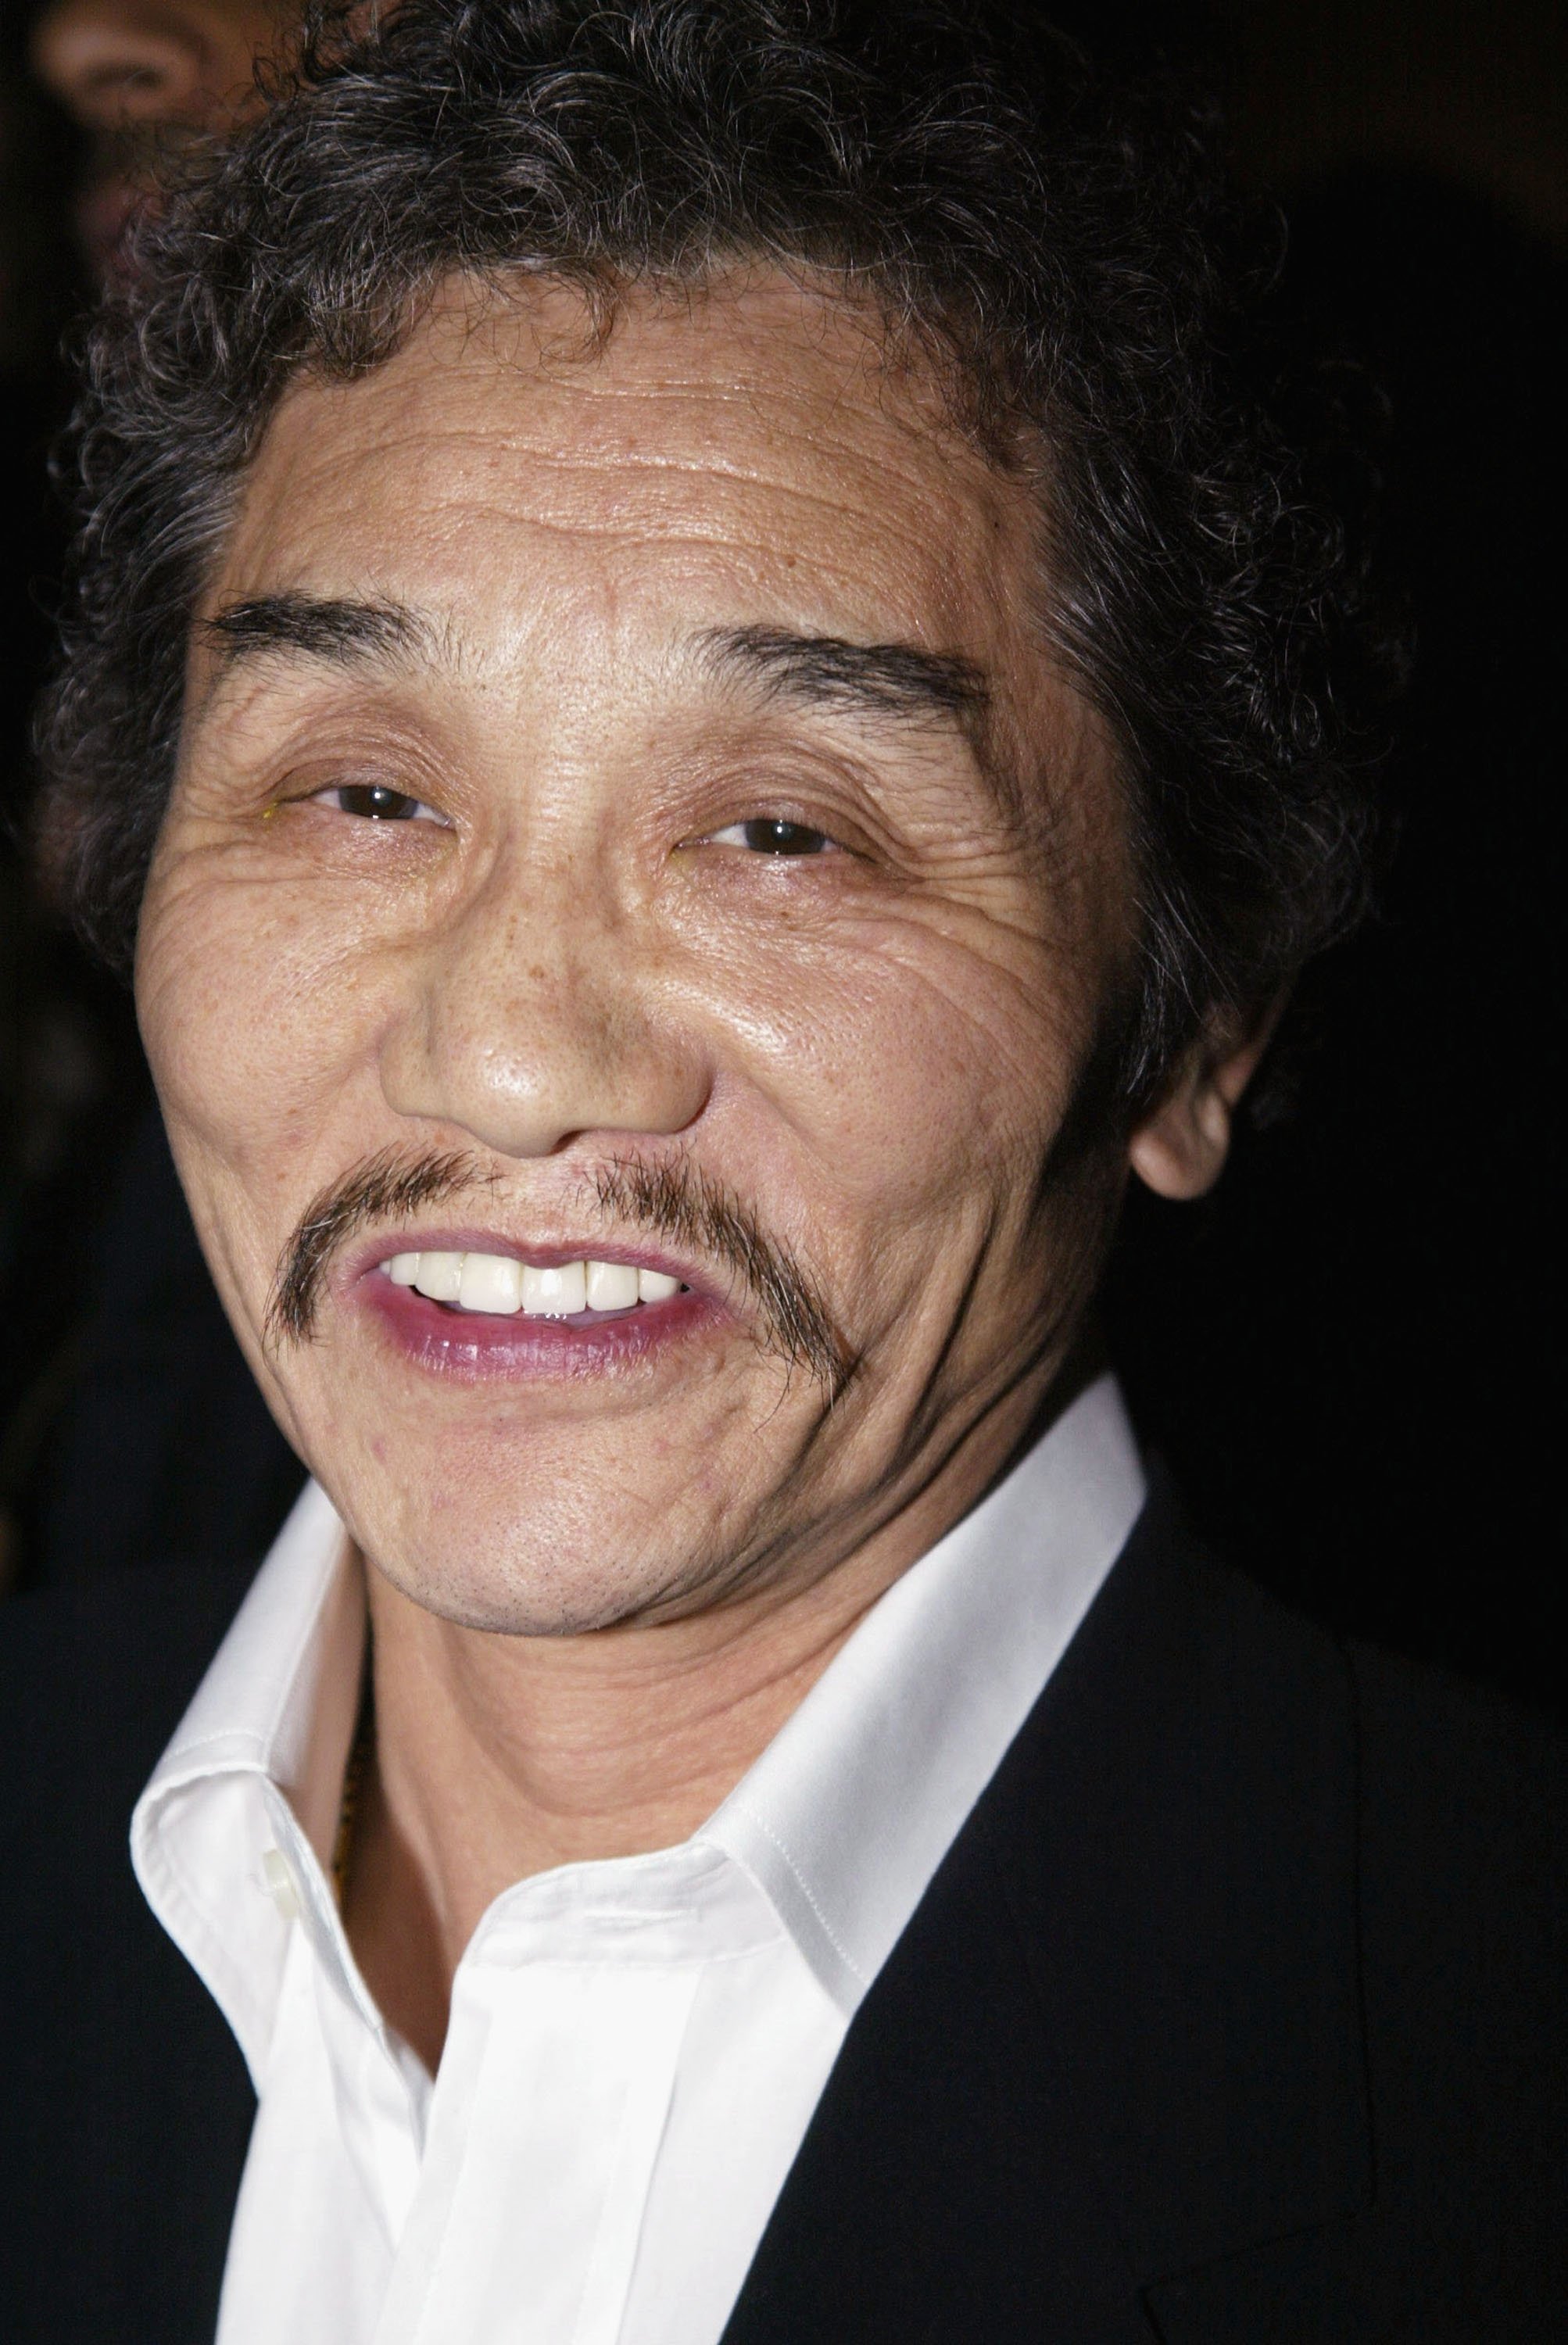 Rocky Aoki attends Rabbi Yehuda Berg's "The 72 Names of God" book launch party at the New Museum for Contemporary Art on April 24, 2003, in New York City. | Source: Getty Images